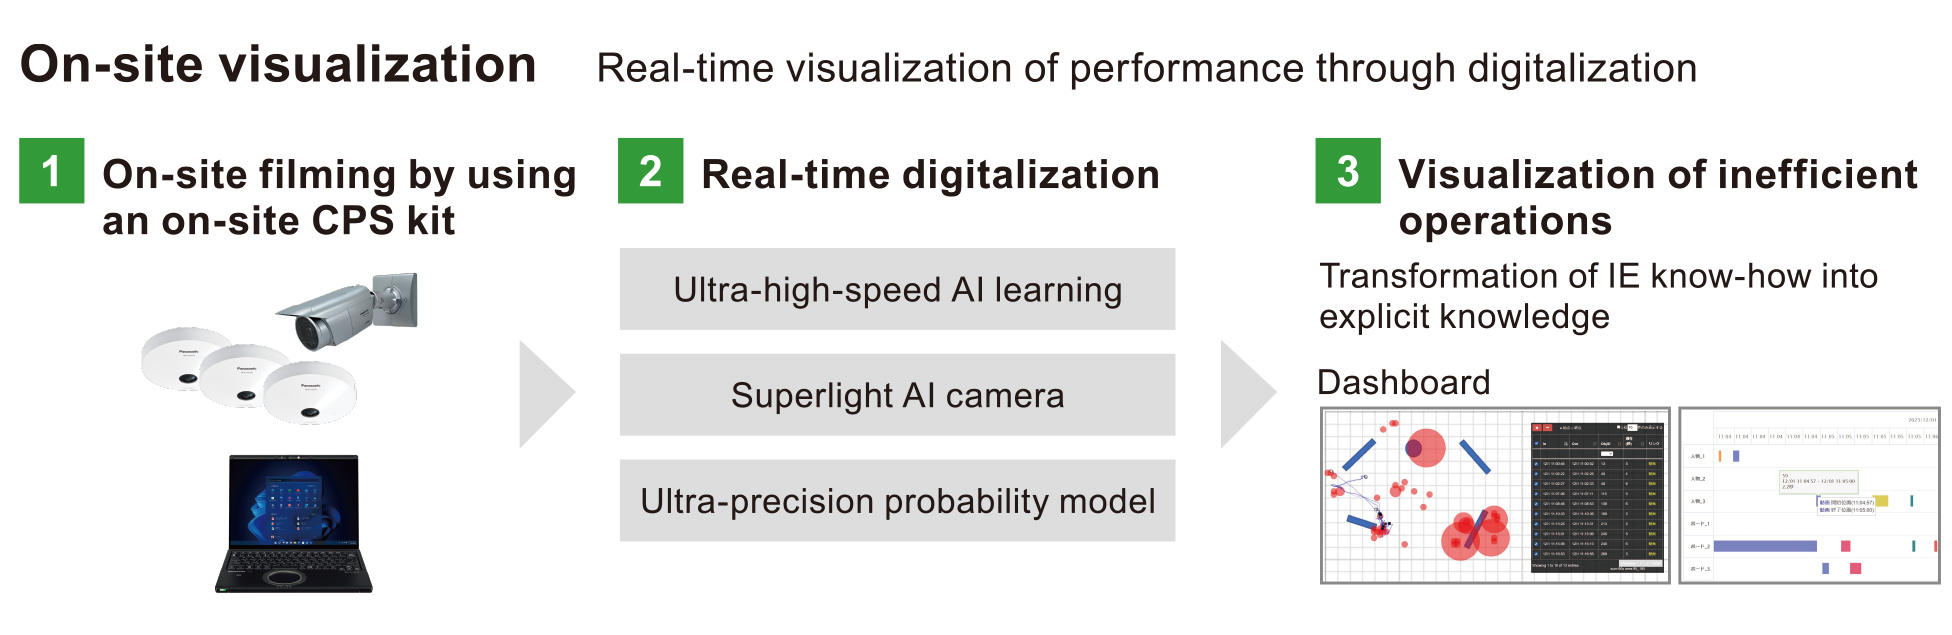 This is a diagram showing a scheme where the On-site filming by using an on-site CPS kit and digitized in real time visualization of performance through digitalization.